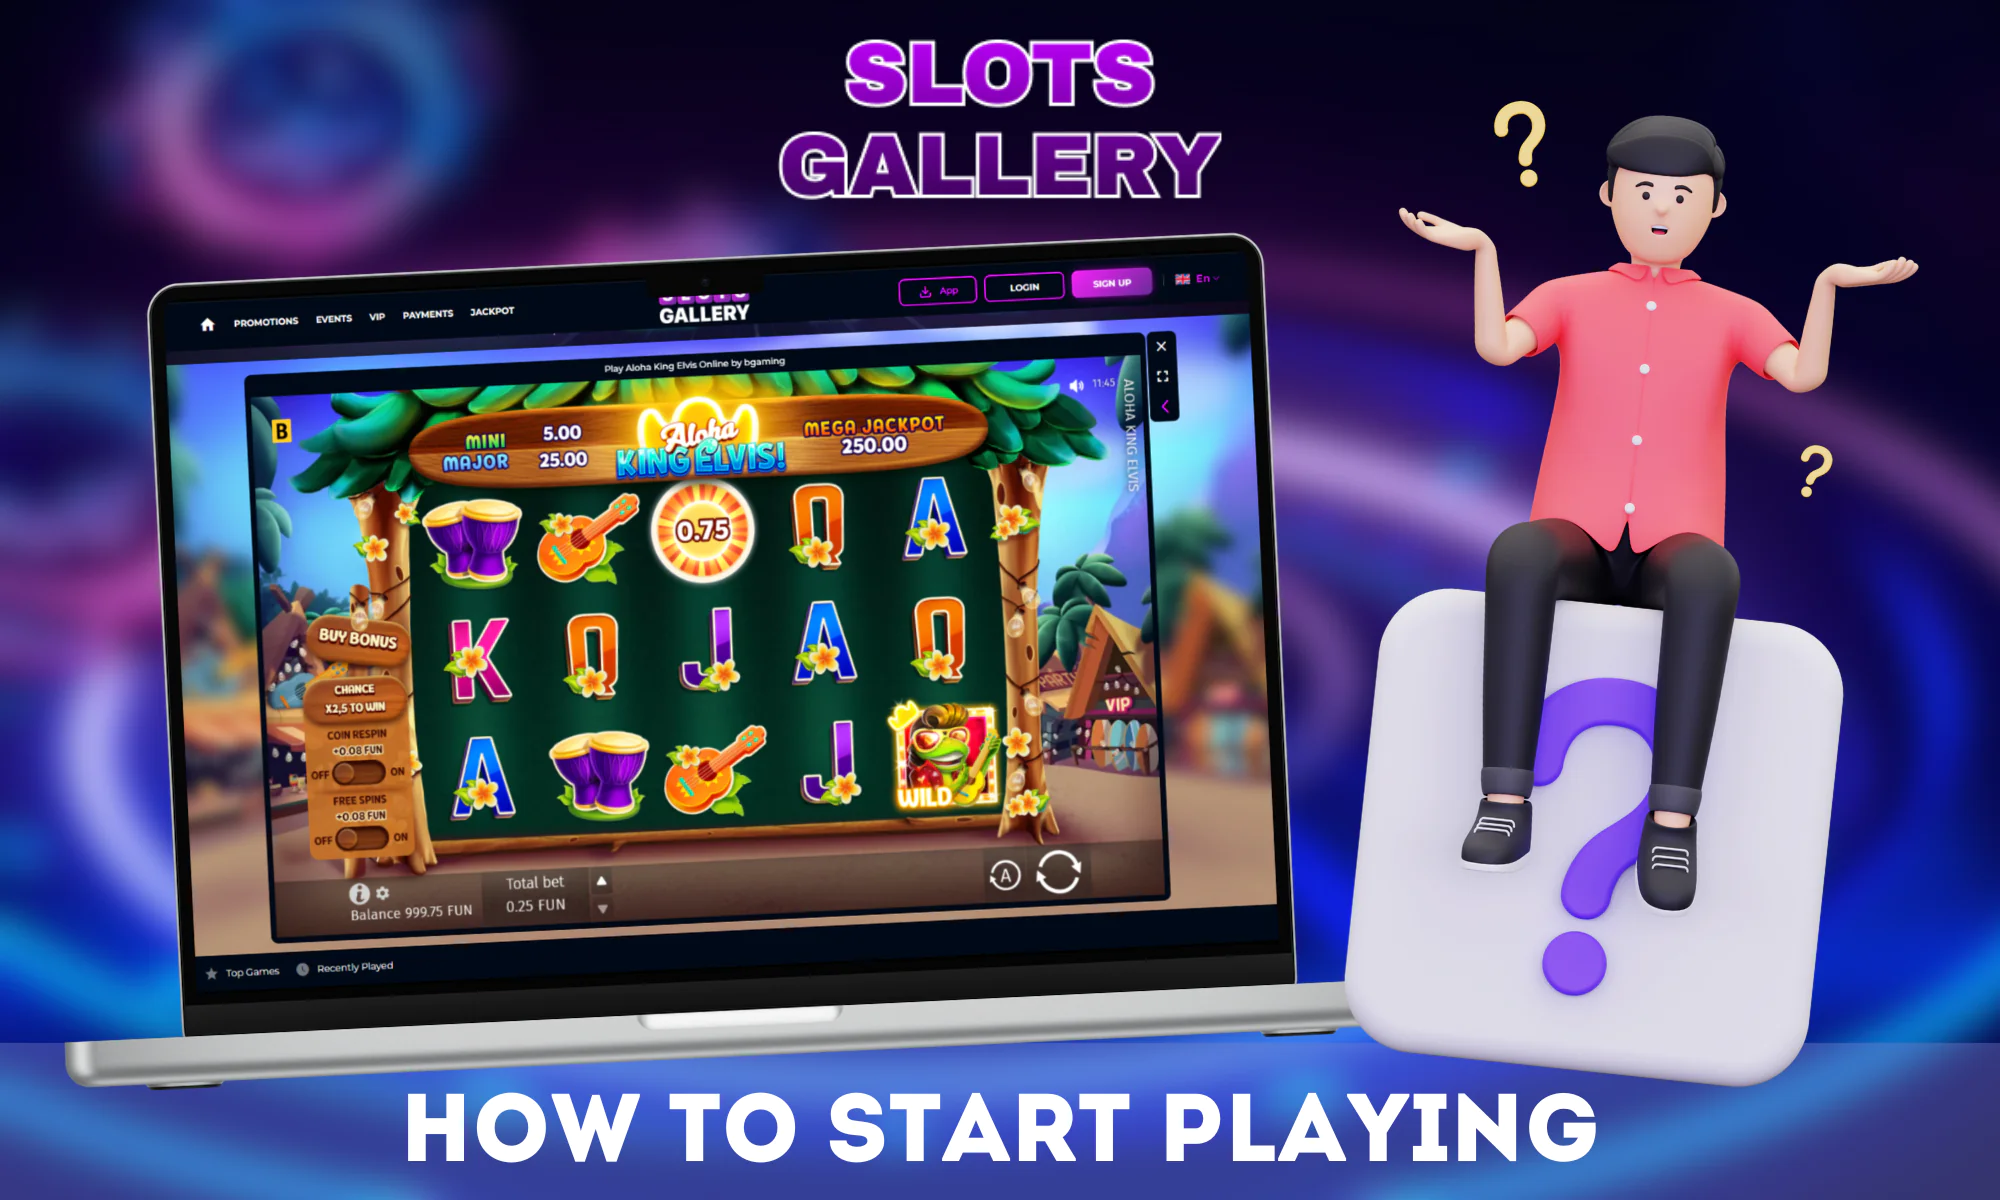 Steps to start playing games at Slots Gallery